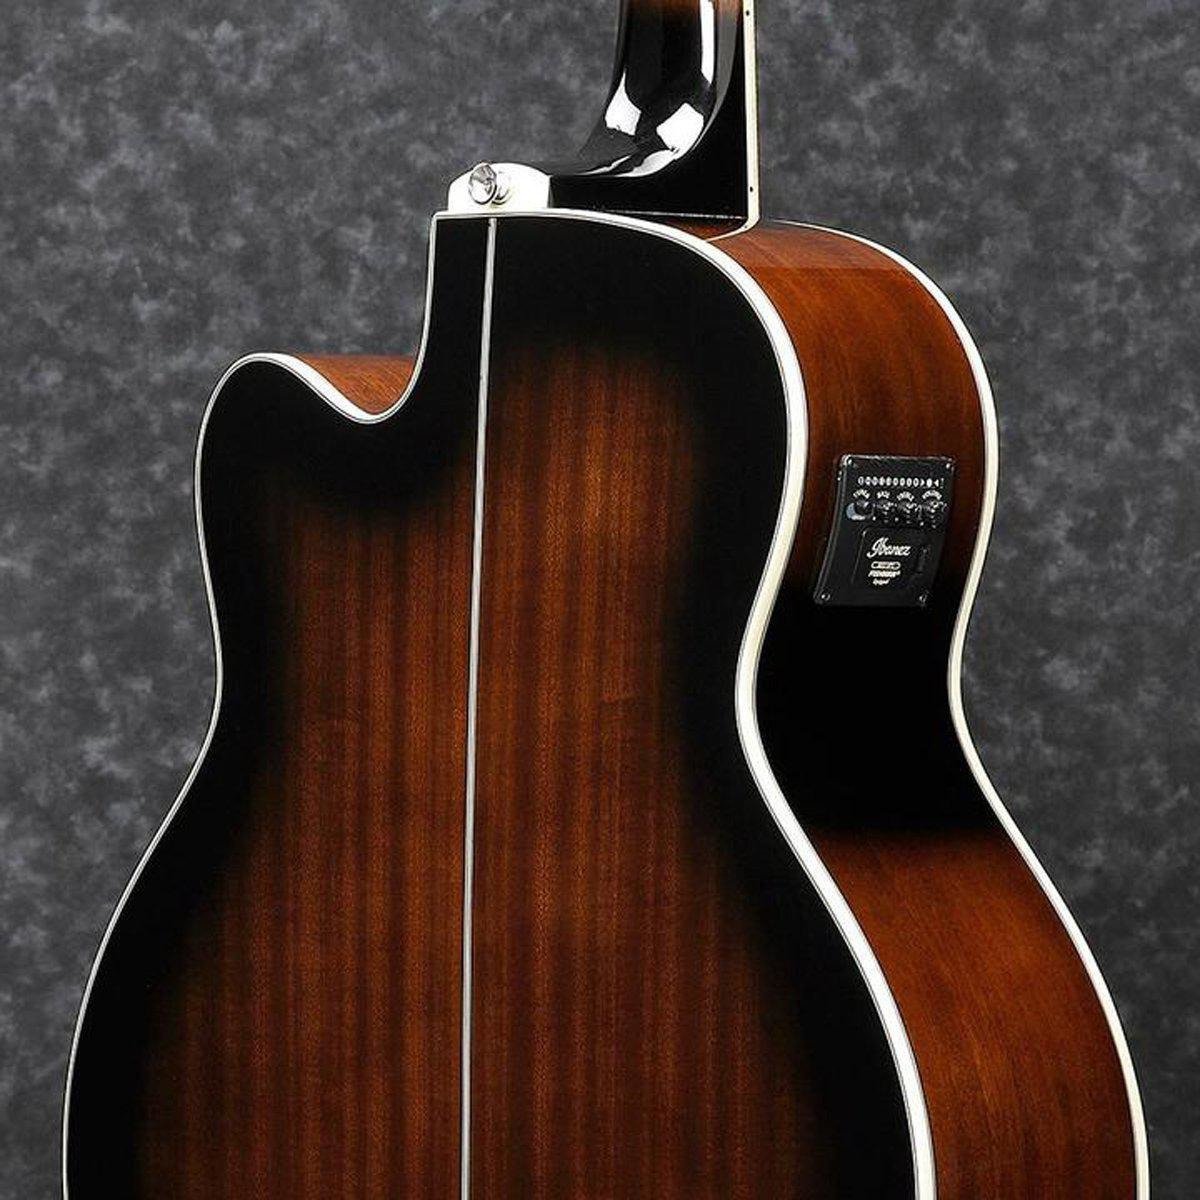 Ibanez AEB10EDVS Acoustic Electric Bass Guitar-Andy's Music